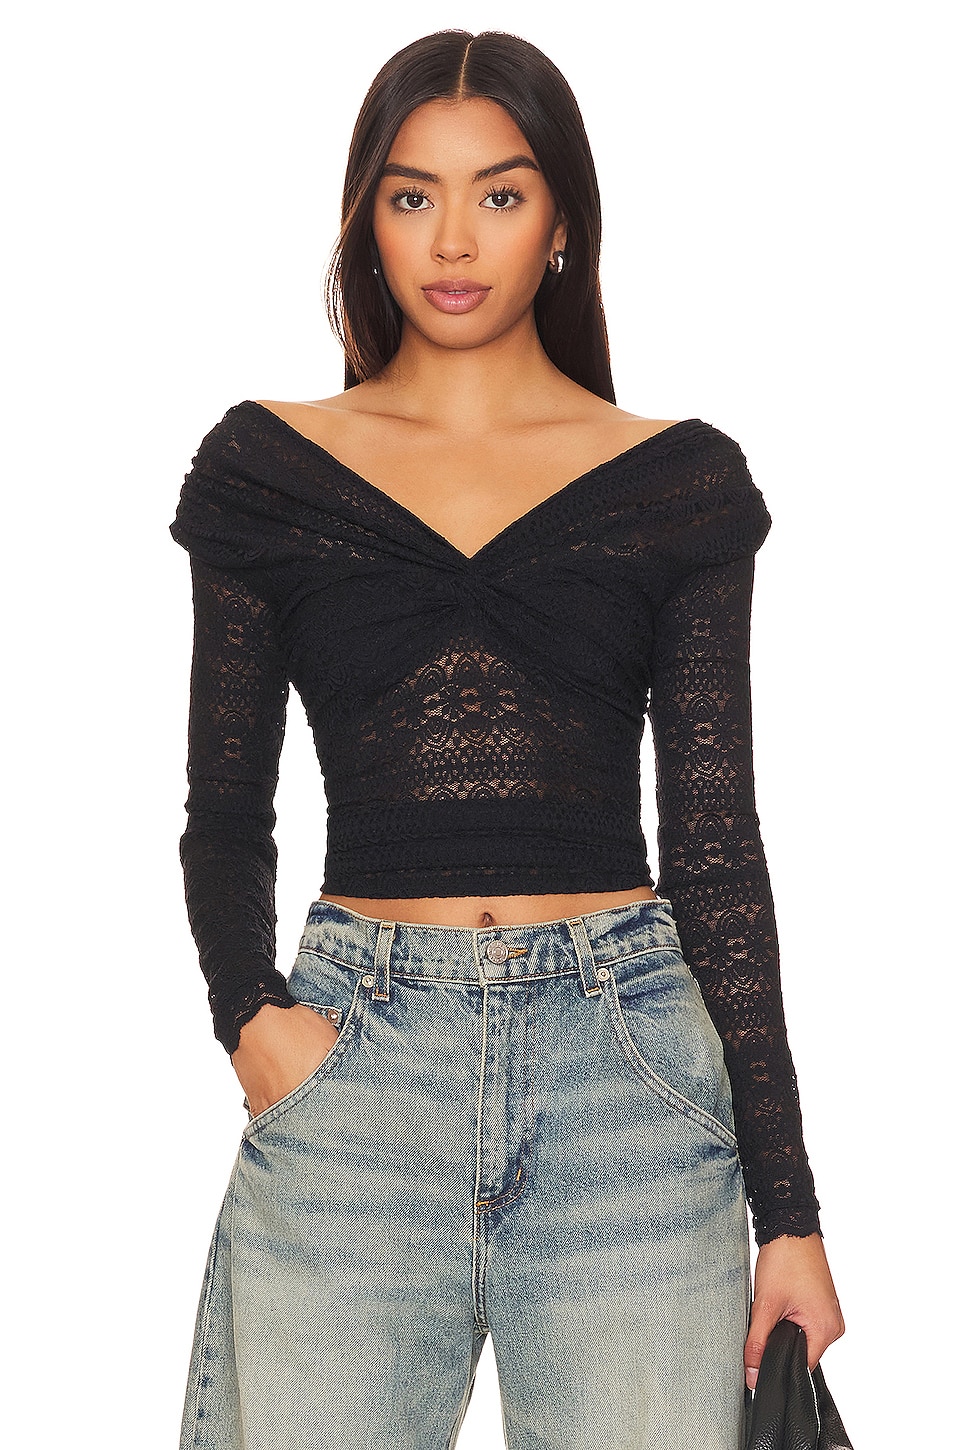 Free People Lace Tops - REVOLVE